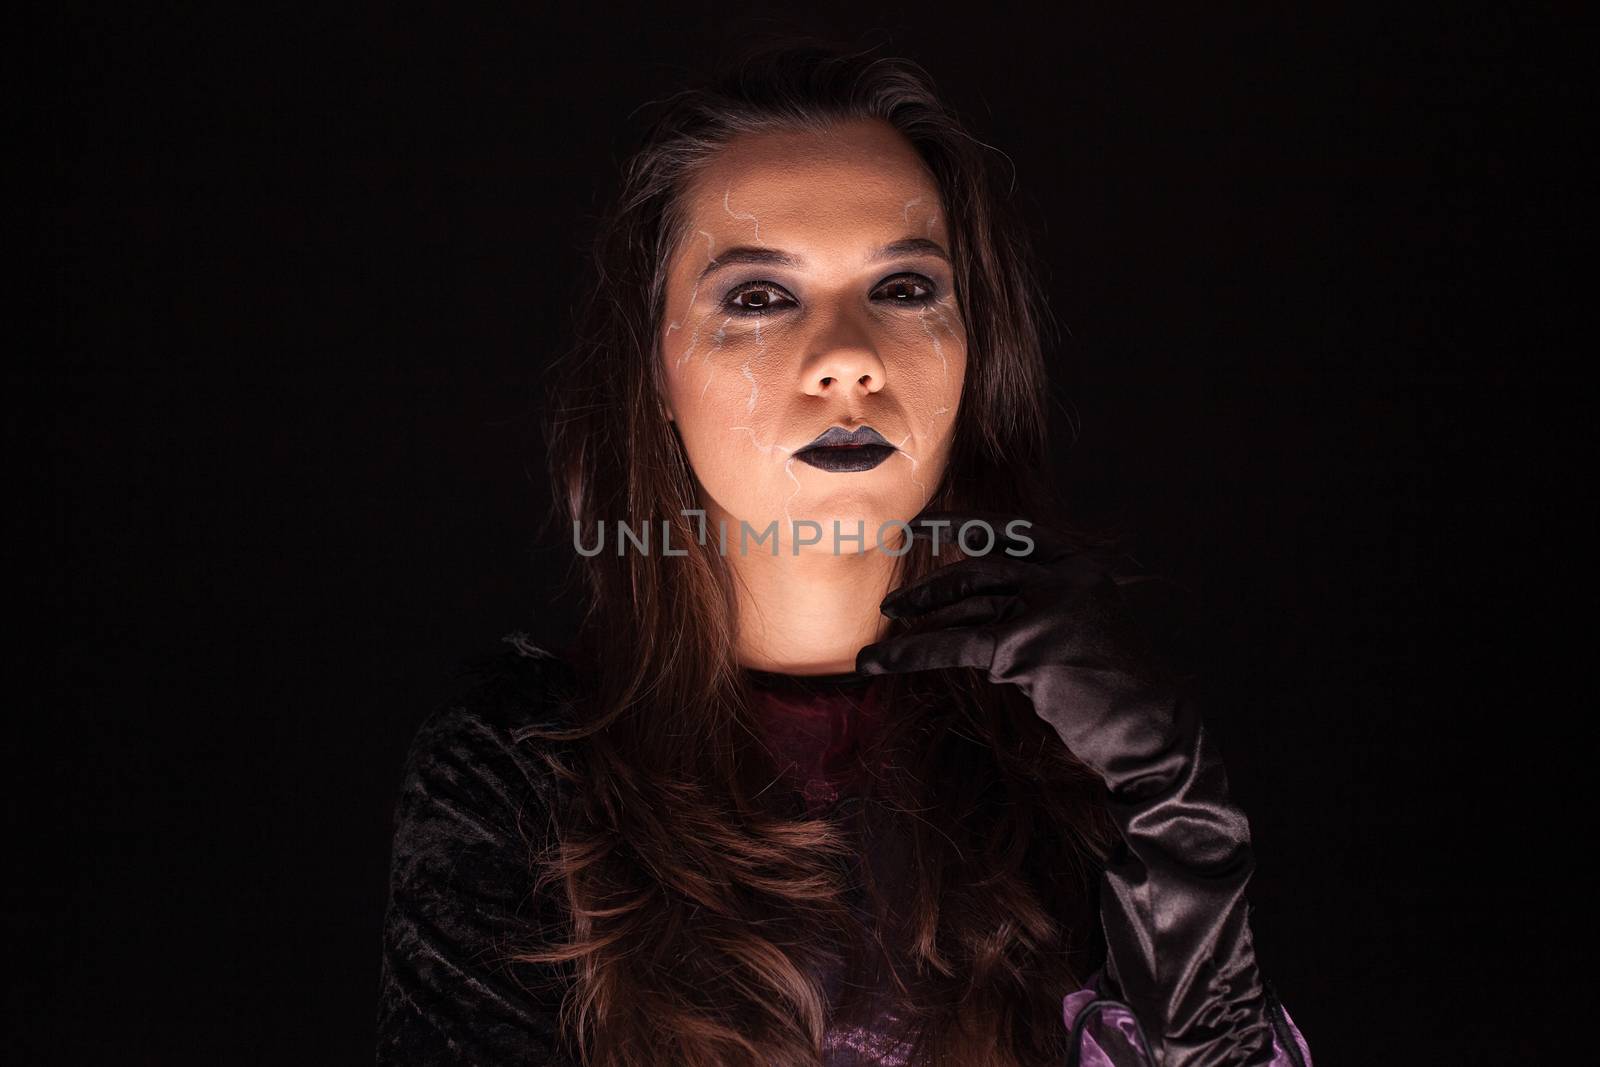 Lady wearing a witch costume over black background by DCStudio